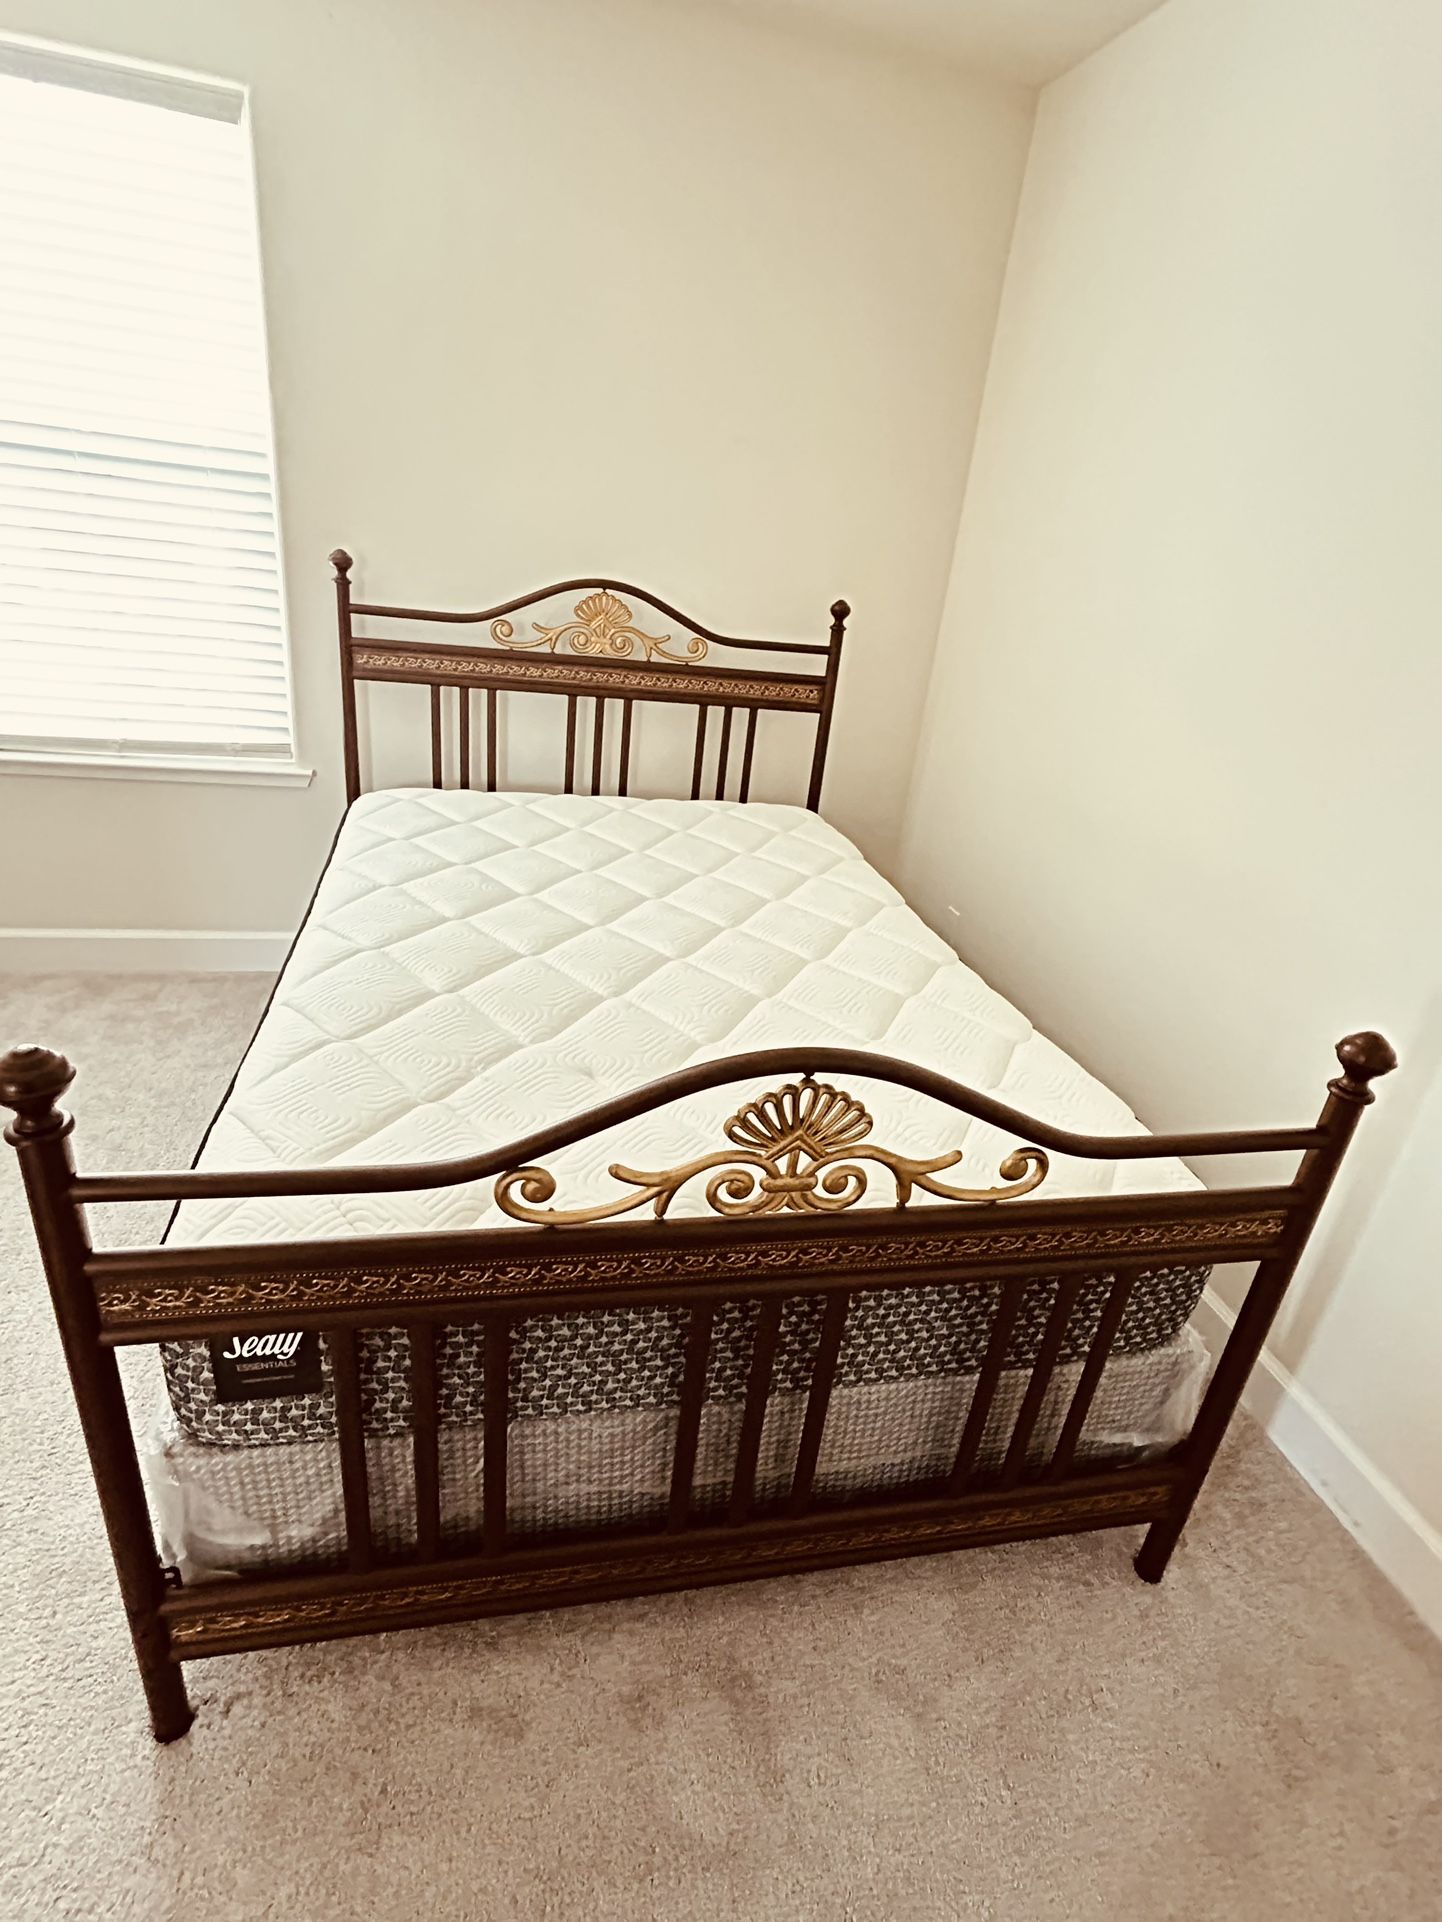 Sealy Essentials full size bed